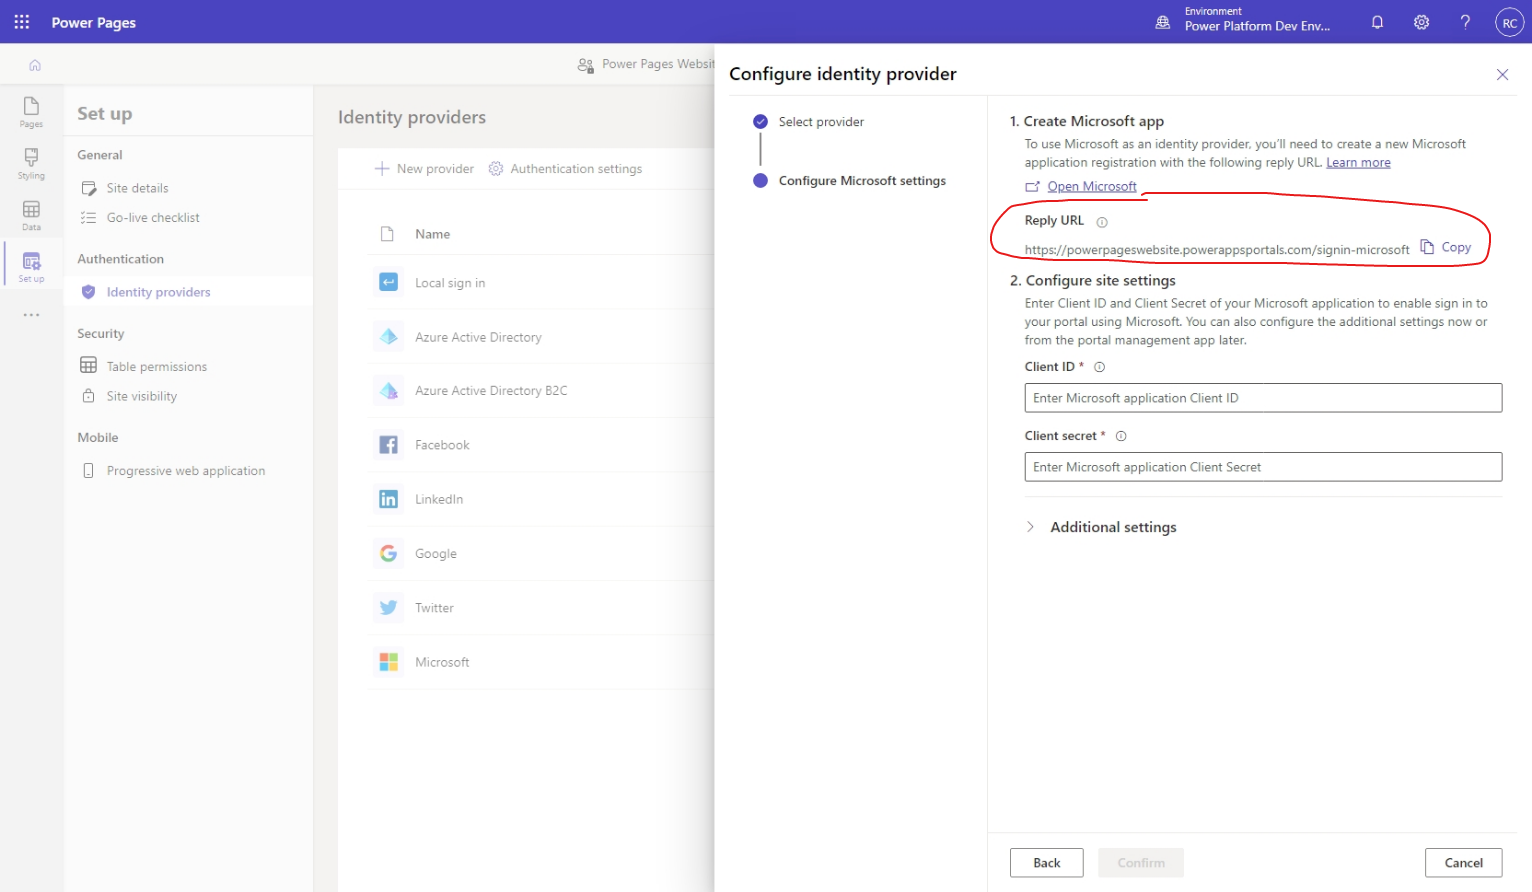 Configure Microsoft settings step of Configure identity provider flyout menu, with Reply URL circled.